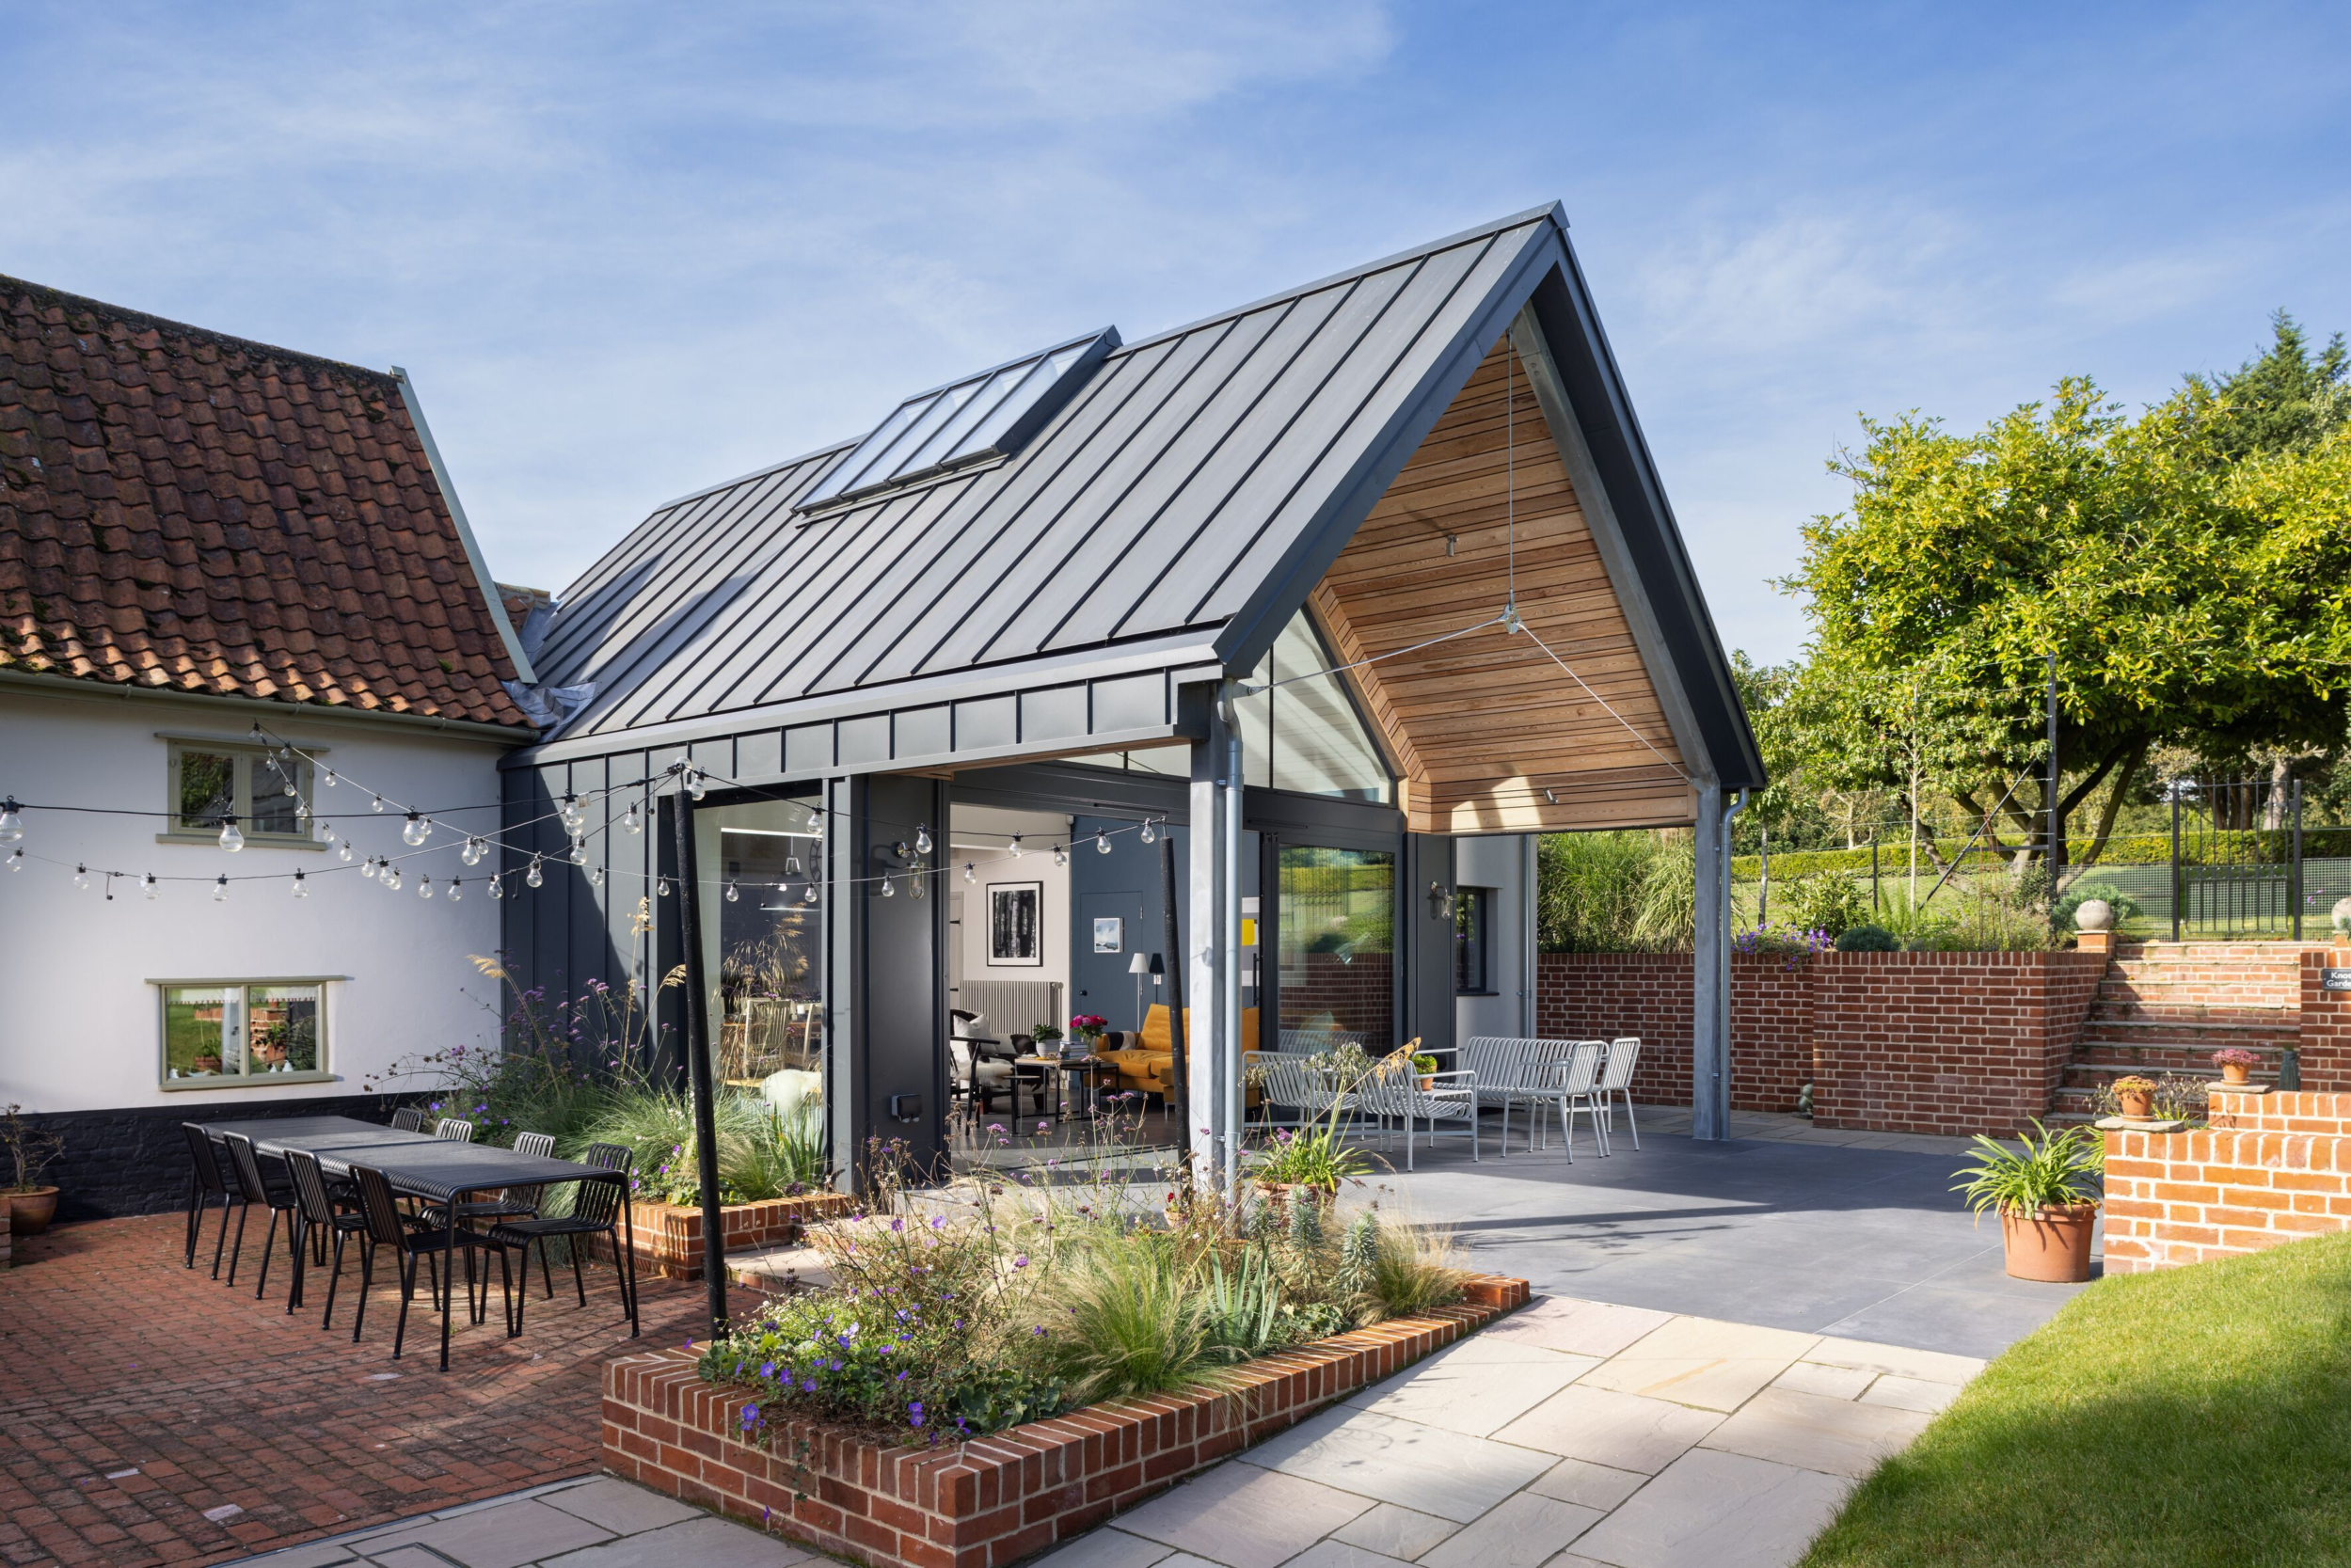 Modern home extension using standing seam metal roof and wall fascia